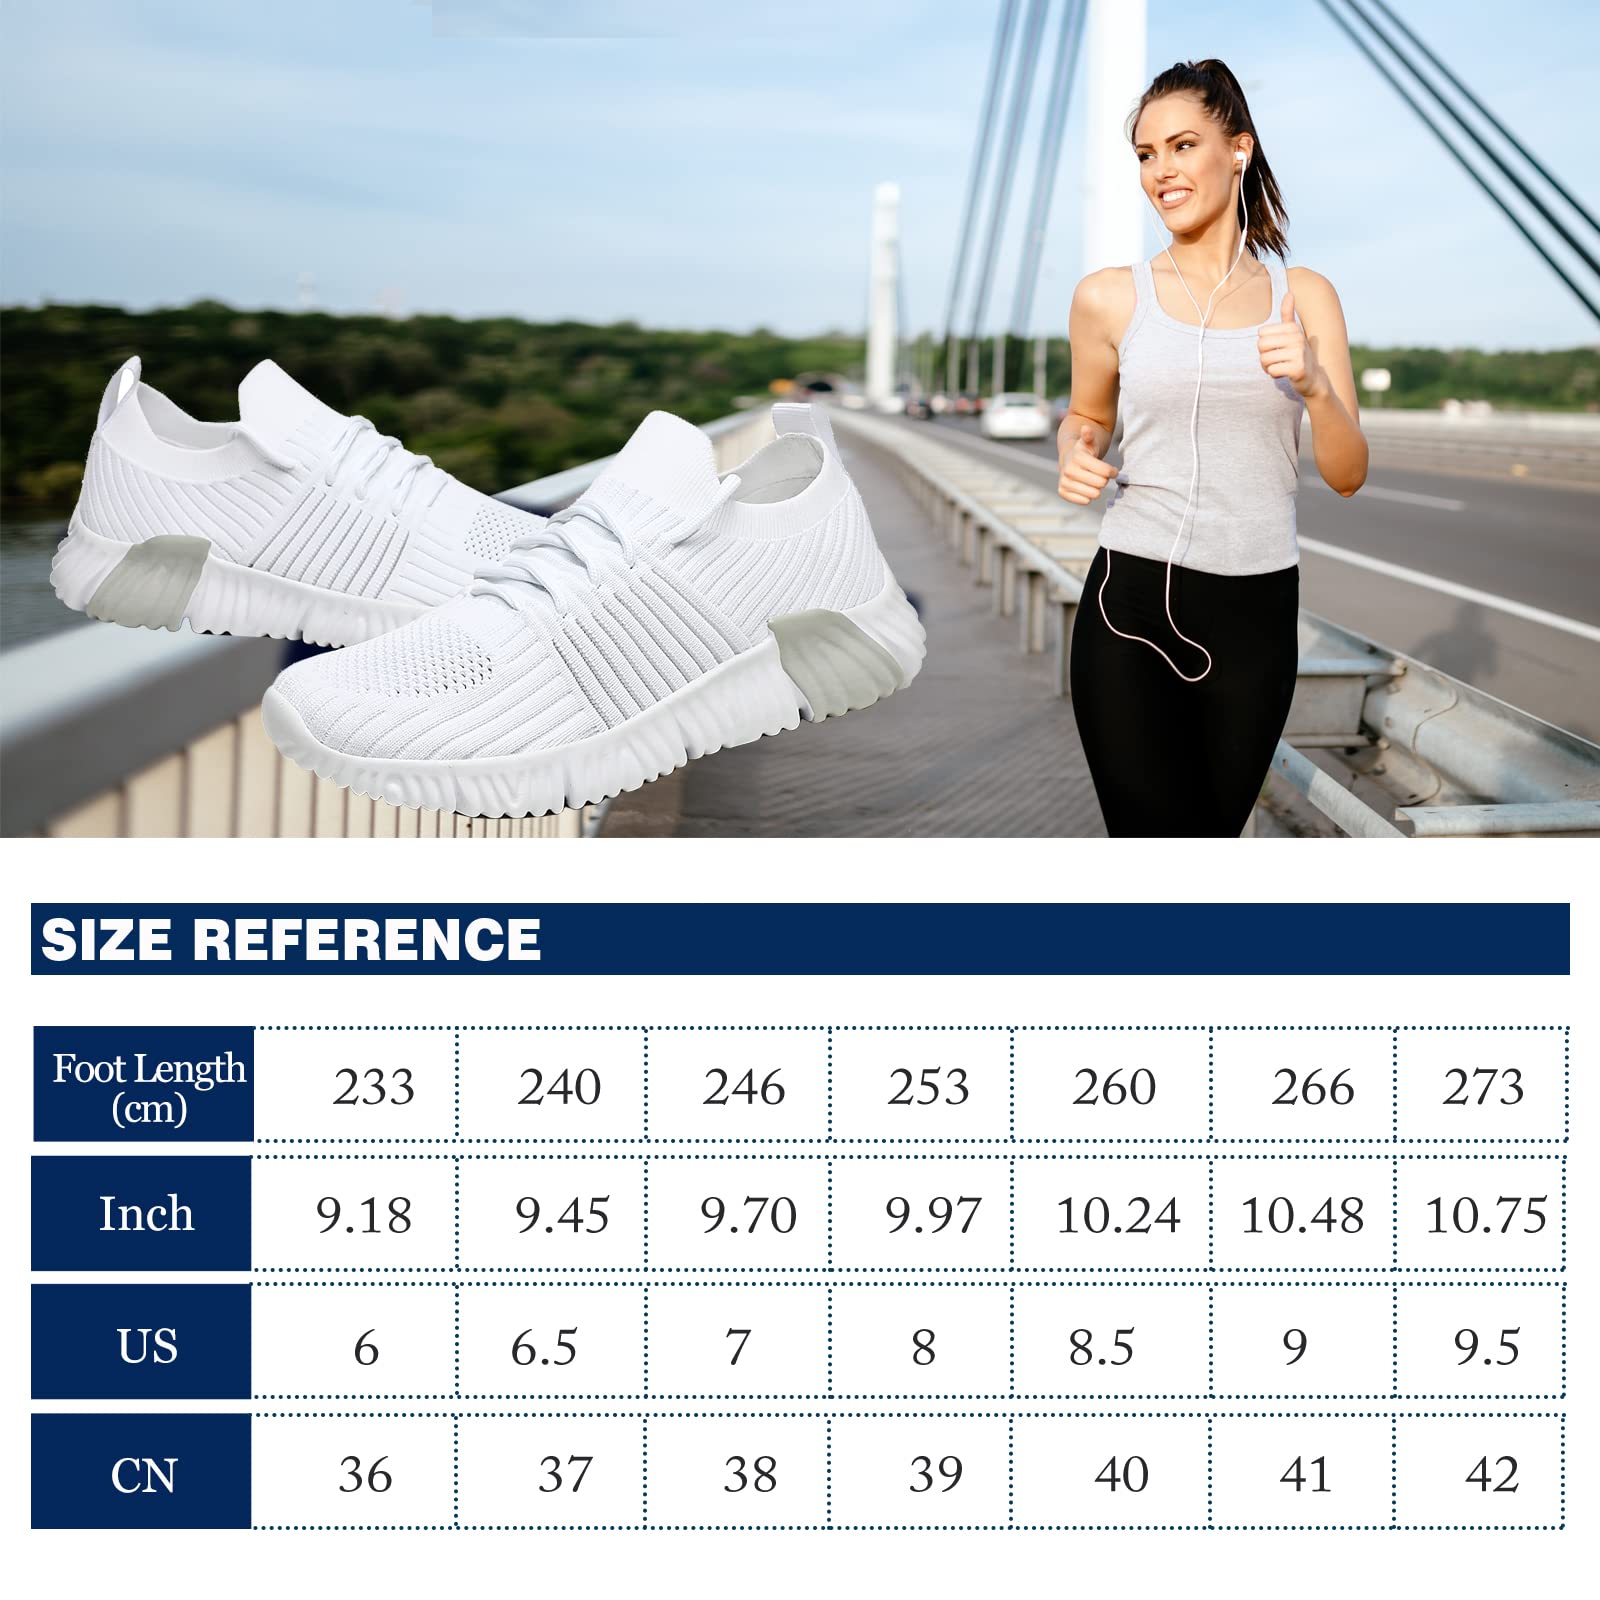 FULORIS Women's Slip On Comfort Golf Shoes Walking Shoes for Women Non Slip Running Shoes Breathable Lightweight Gym Sneakers White 7